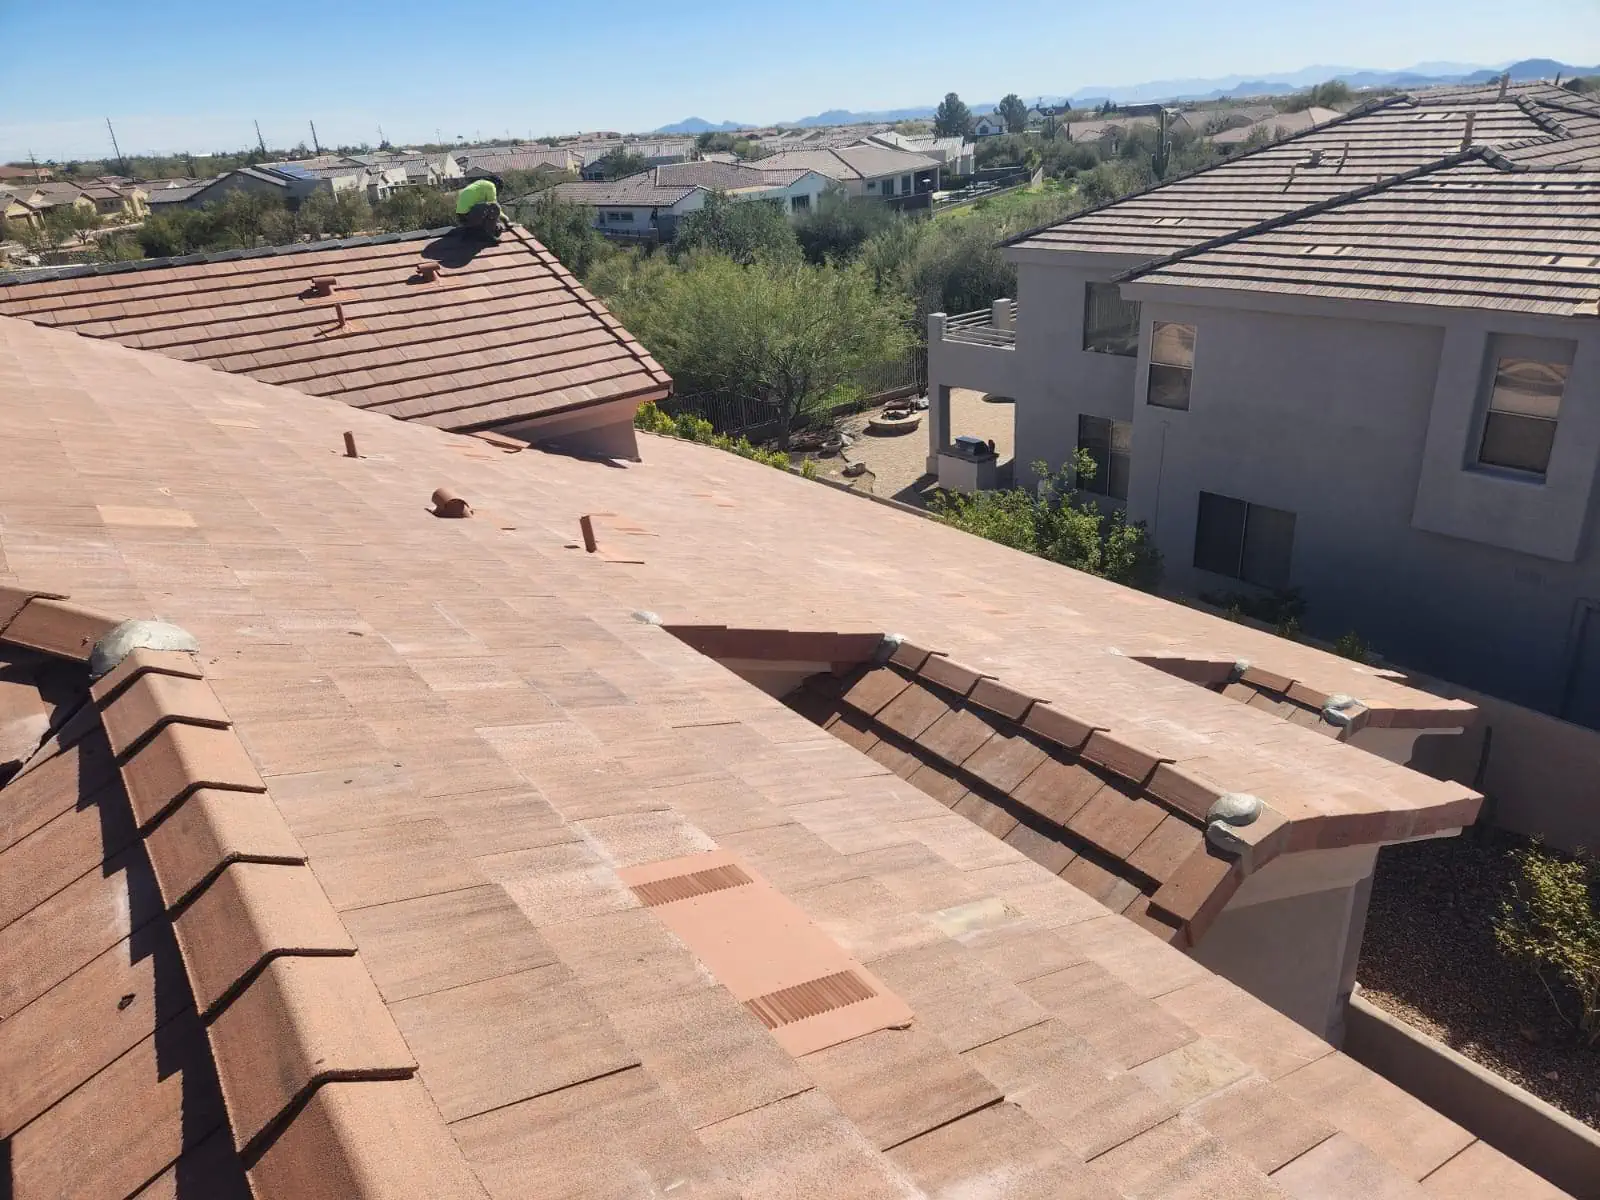 roof with shingles are better for wet climates